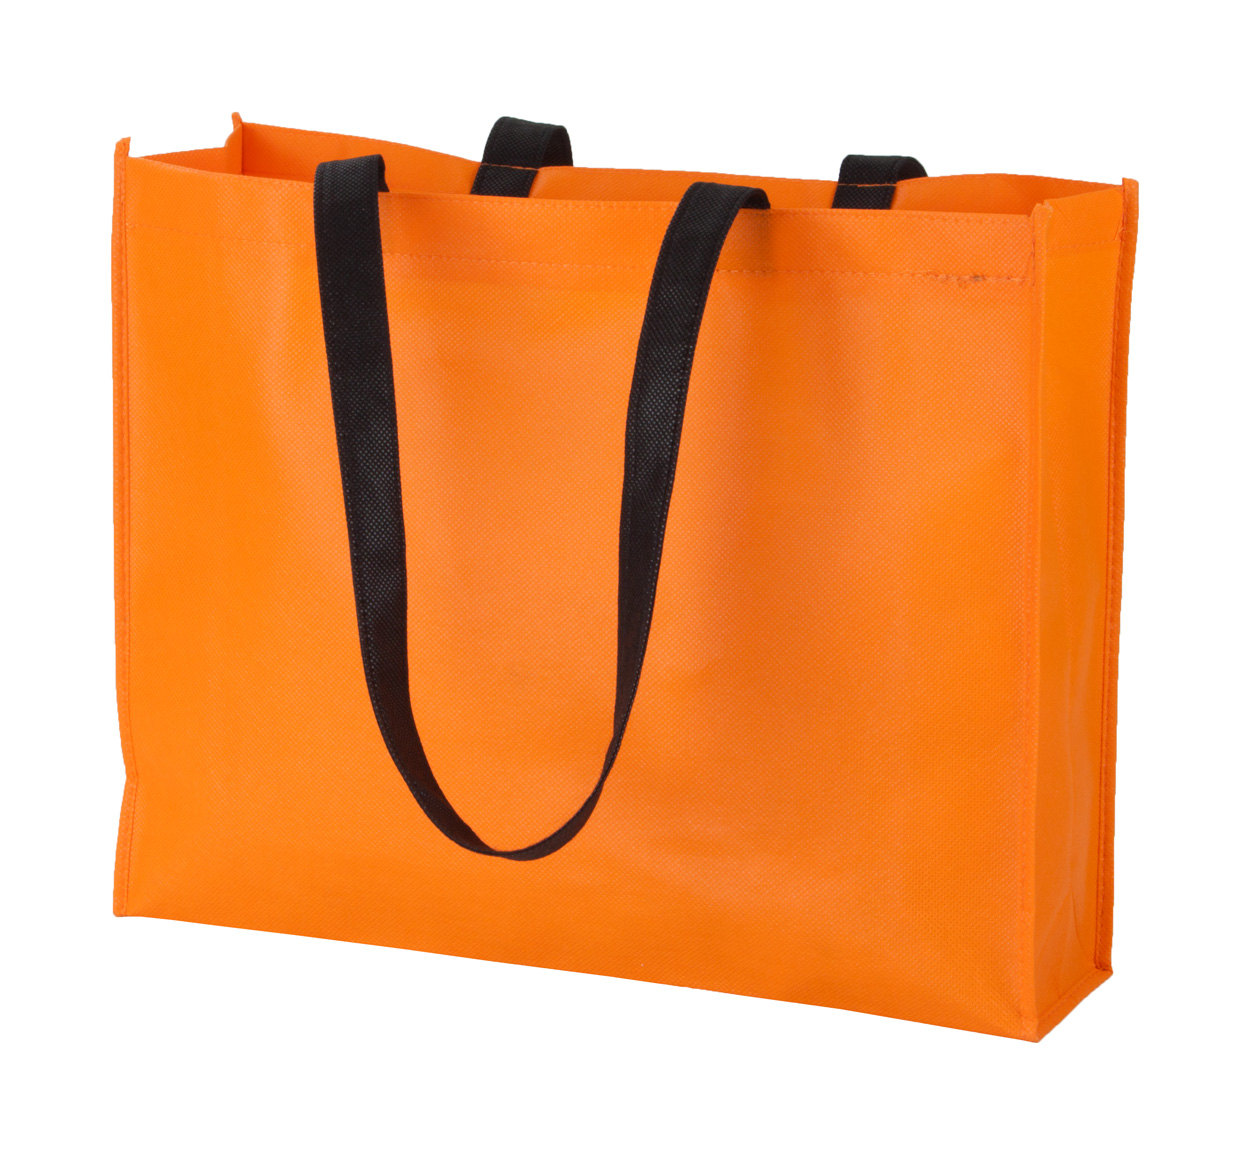 Shopping bag TUCSON made of non-woven fabric